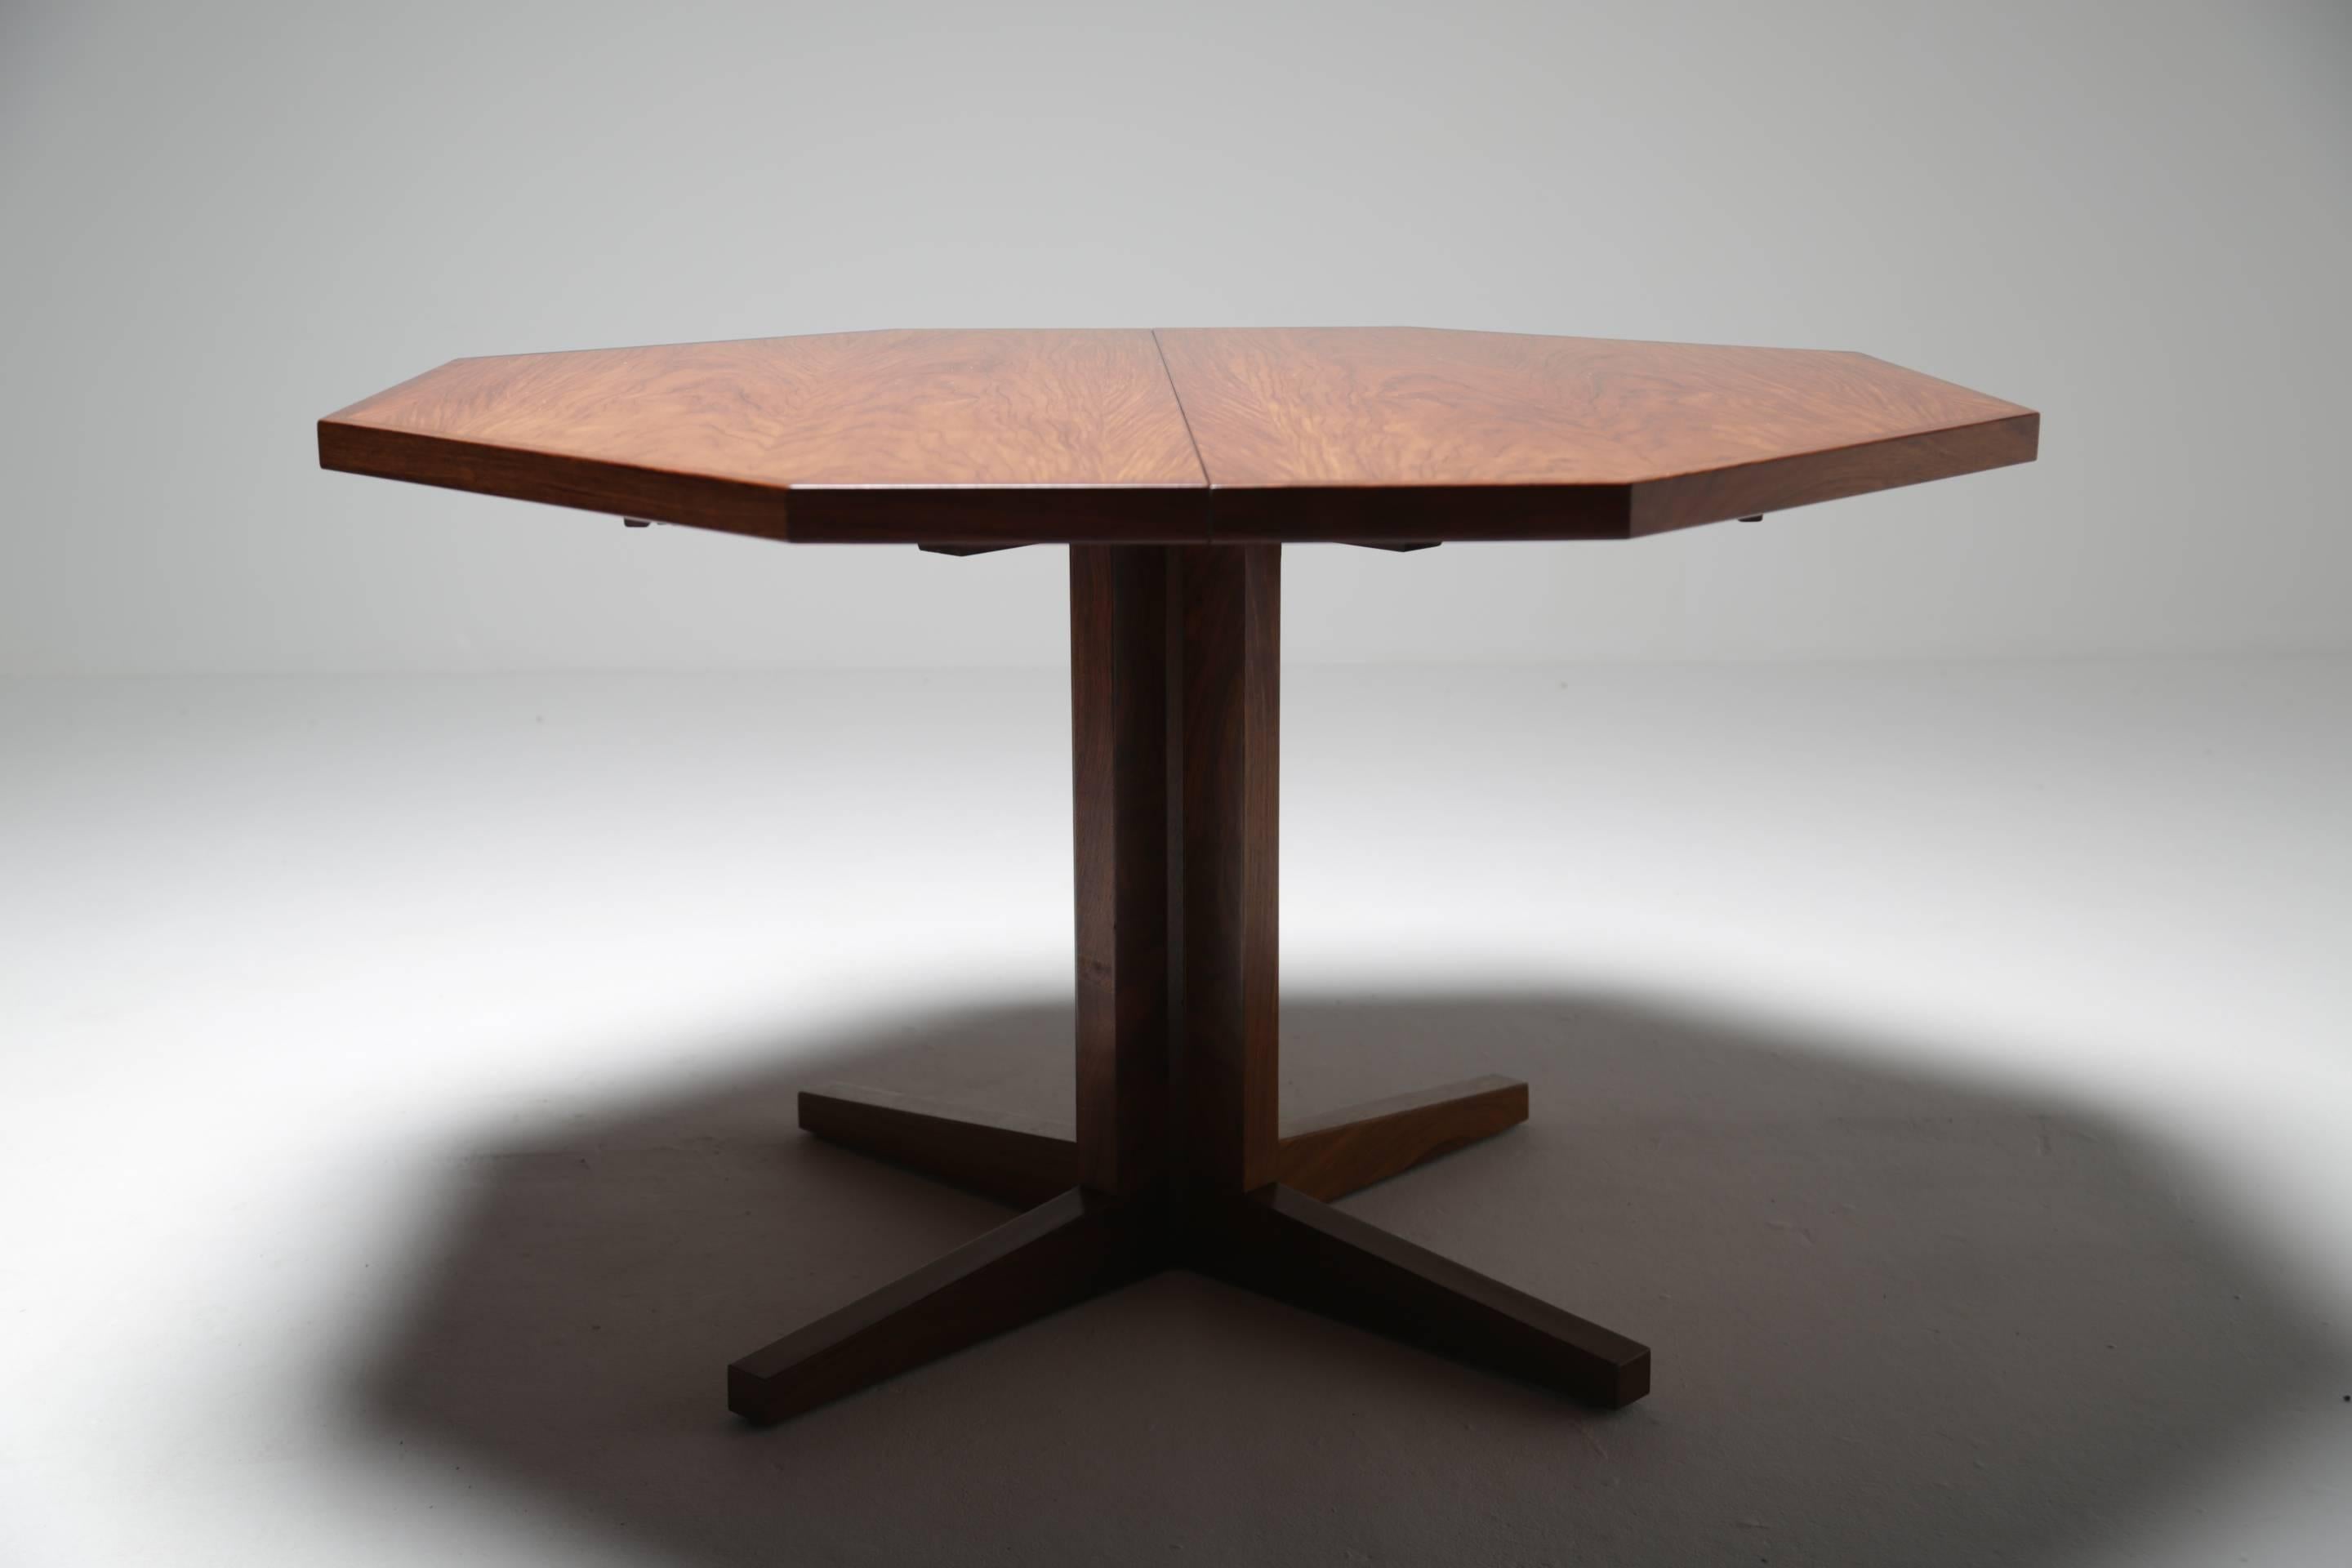 Midcentury Rosewood Octagonal Dining Table by Dyrlund, Denmark 1